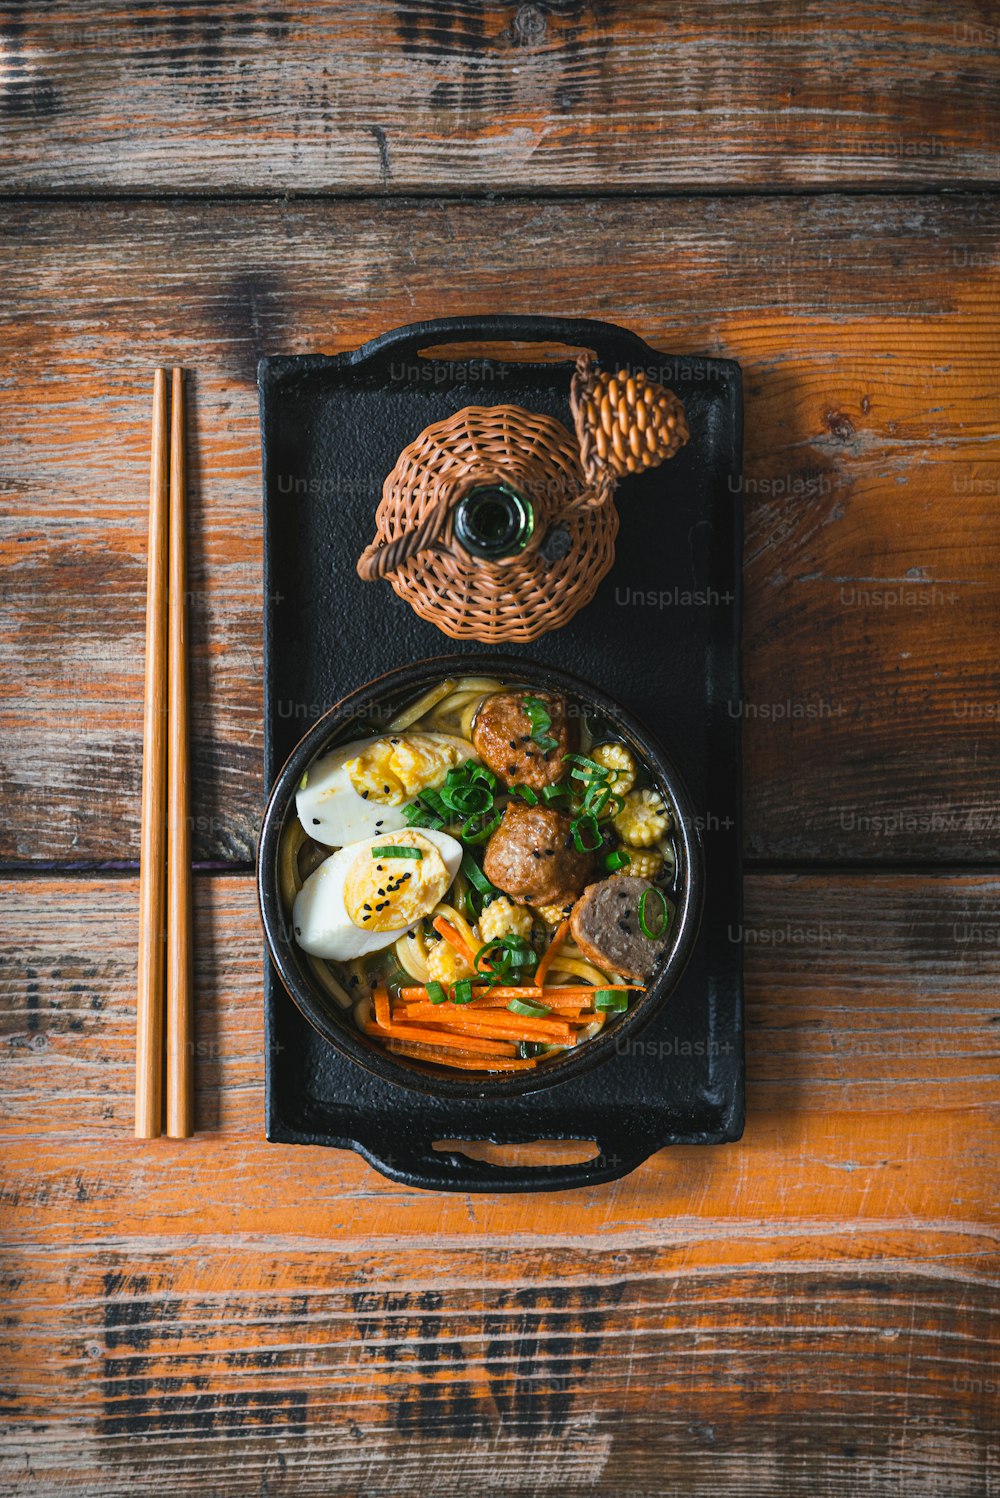 a bowl of food with chopsticks on a wooden table